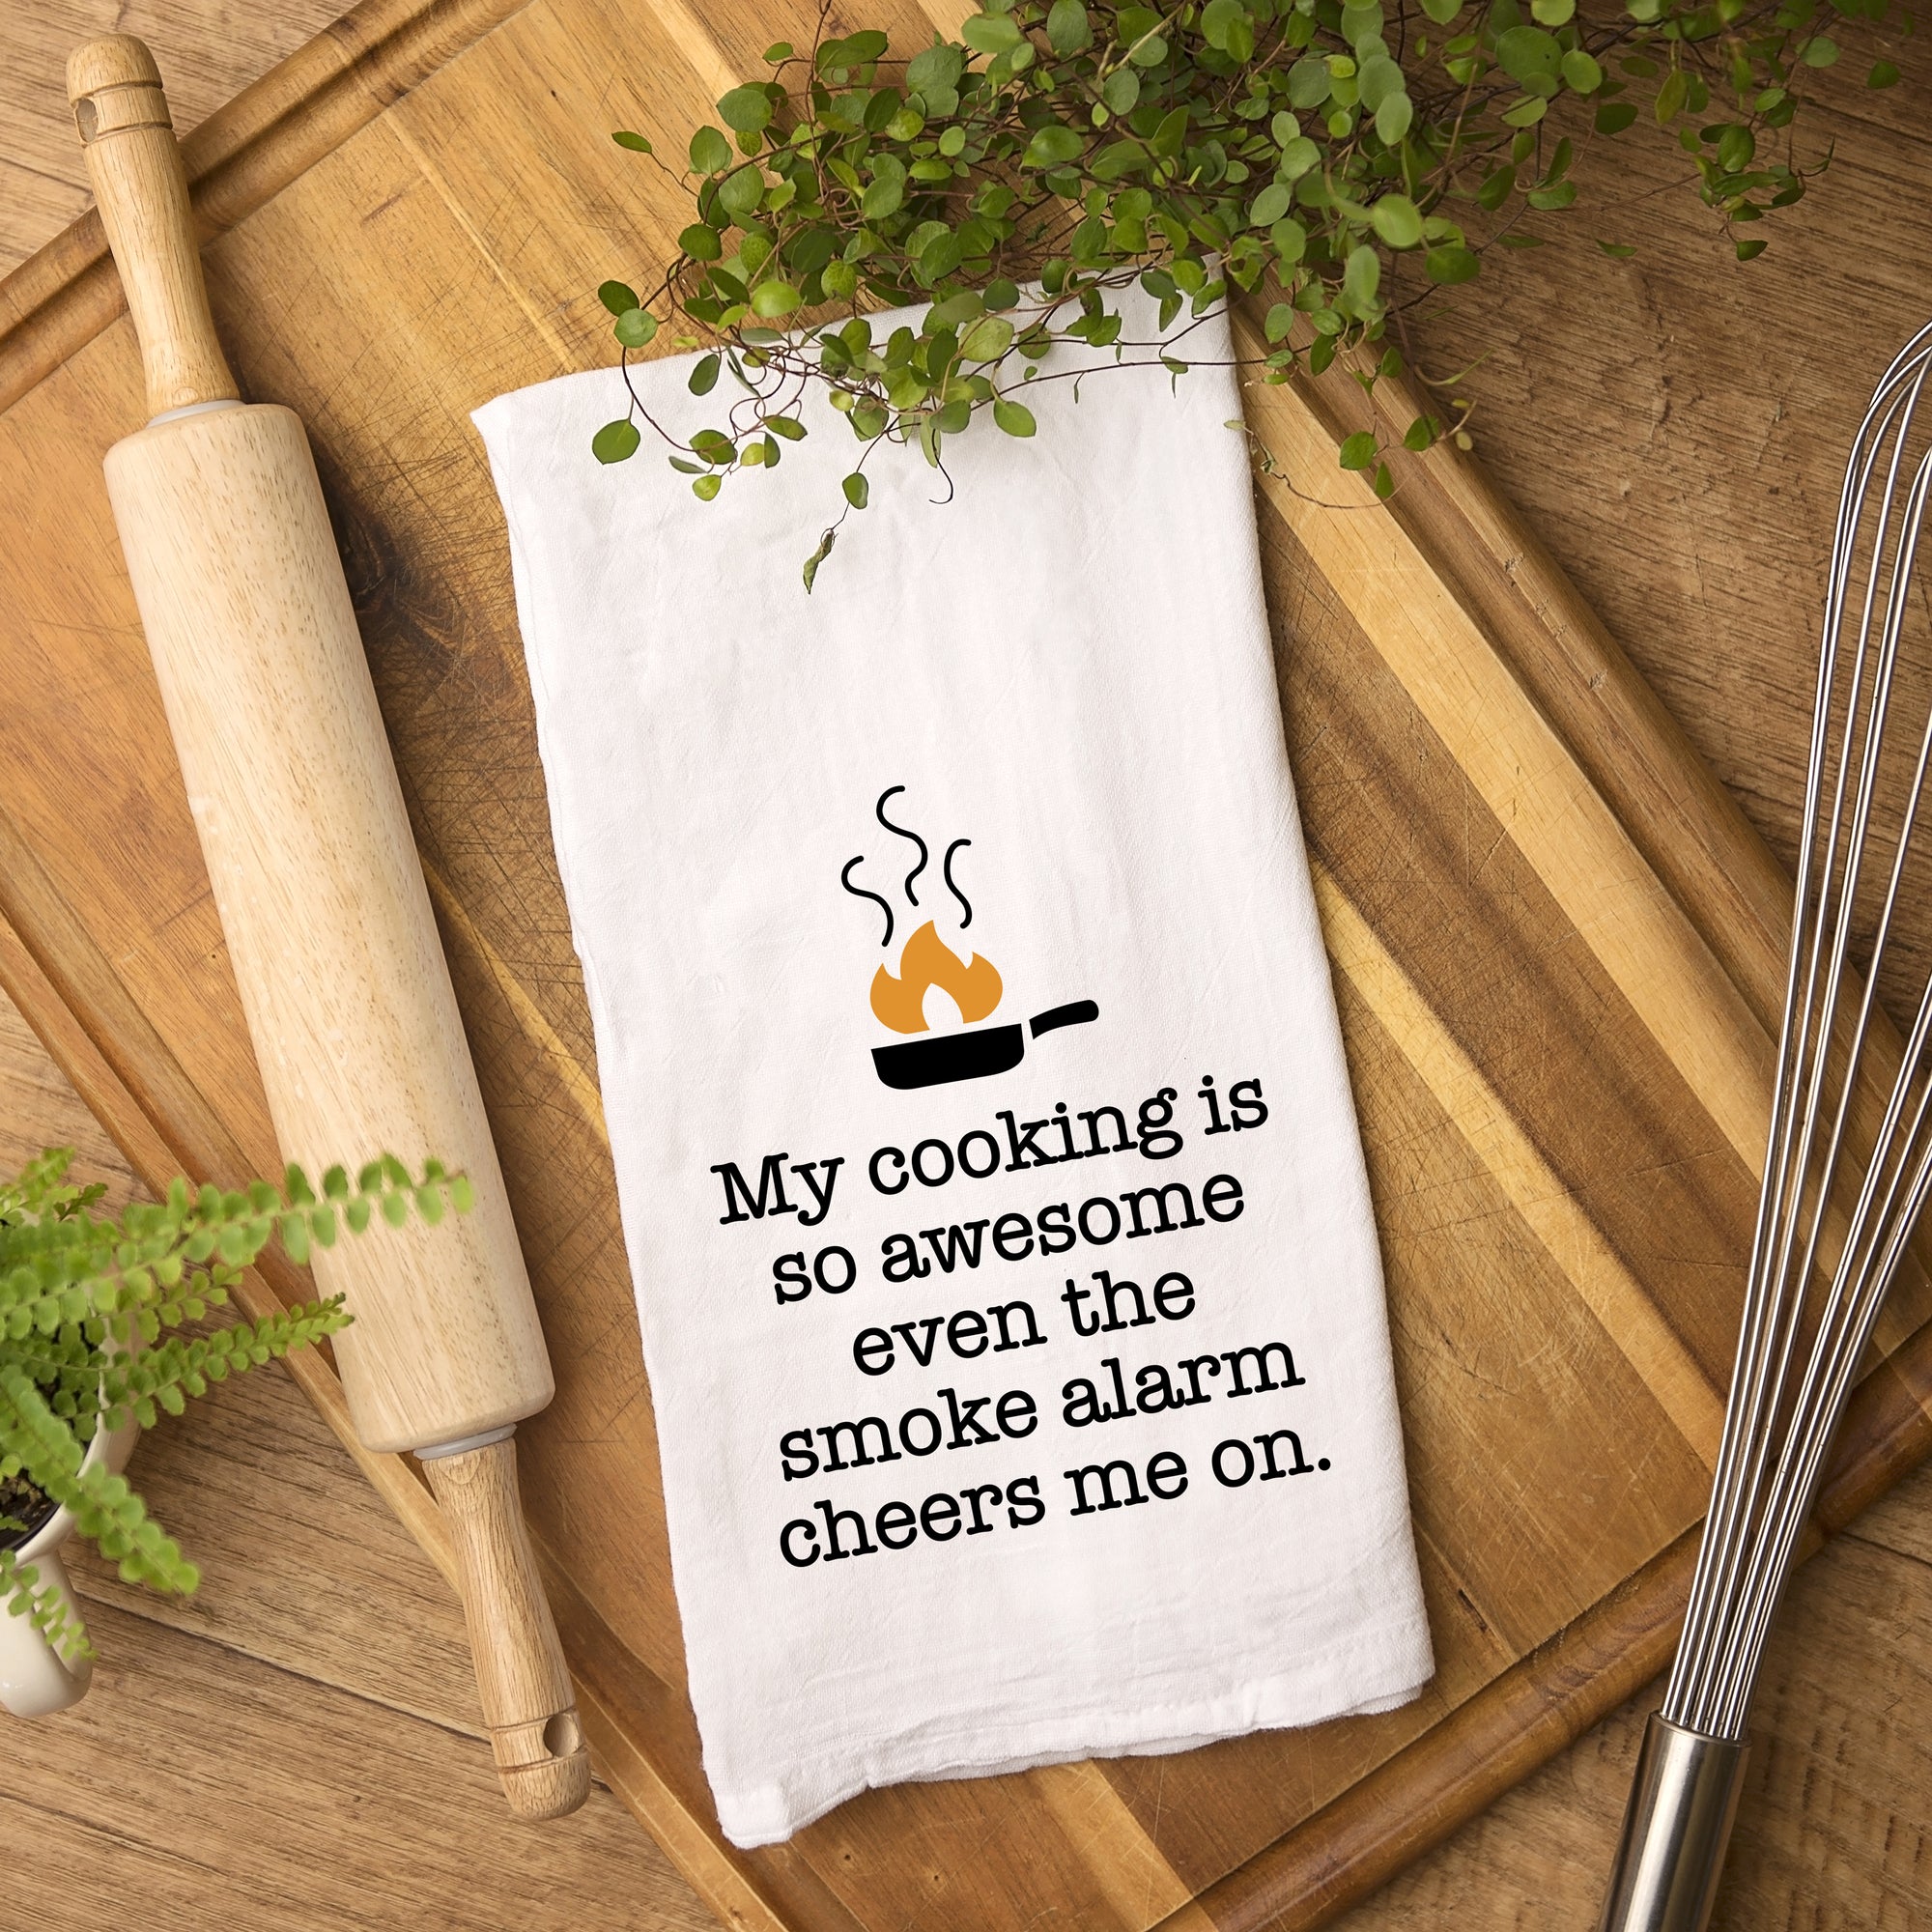 "My cooking is so awesome even the smoke alarm cheers me on" tea towel, PIPSY.COM